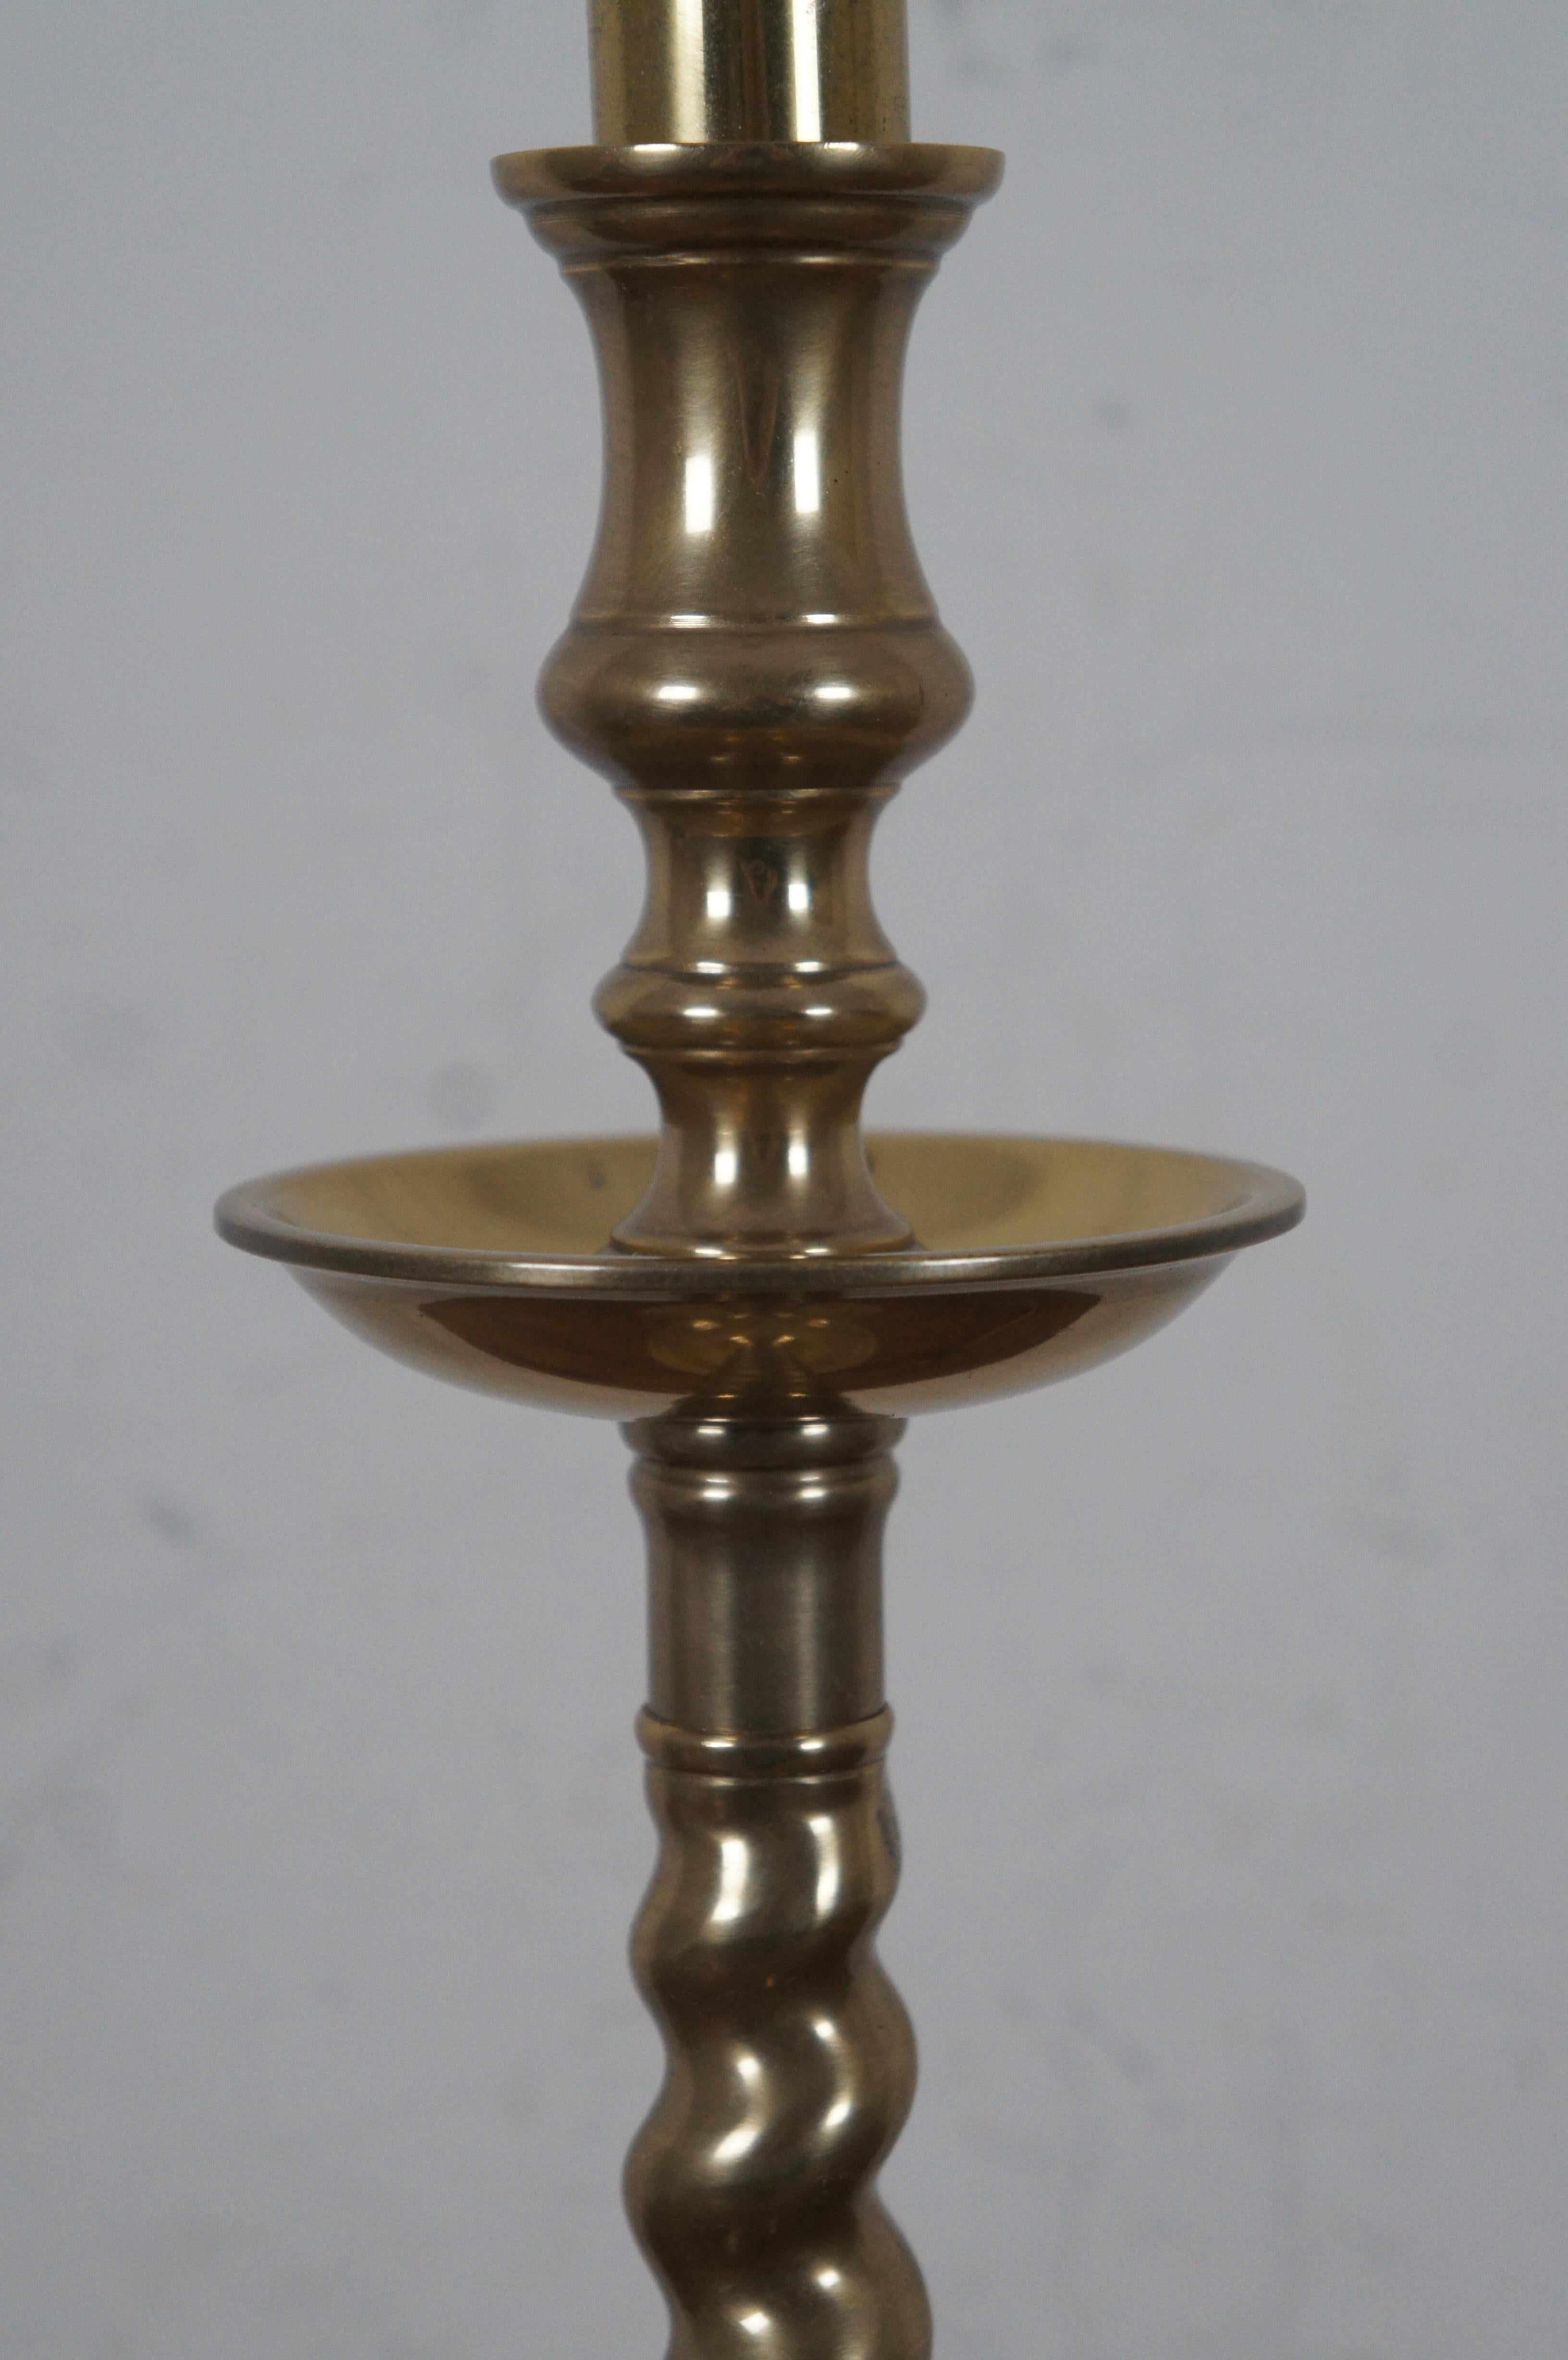 Vintage Frederick Cooper Brass Barley Twist Altar Candlestick Buffet Lamp In Good Condition For Sale In Dayton, OH